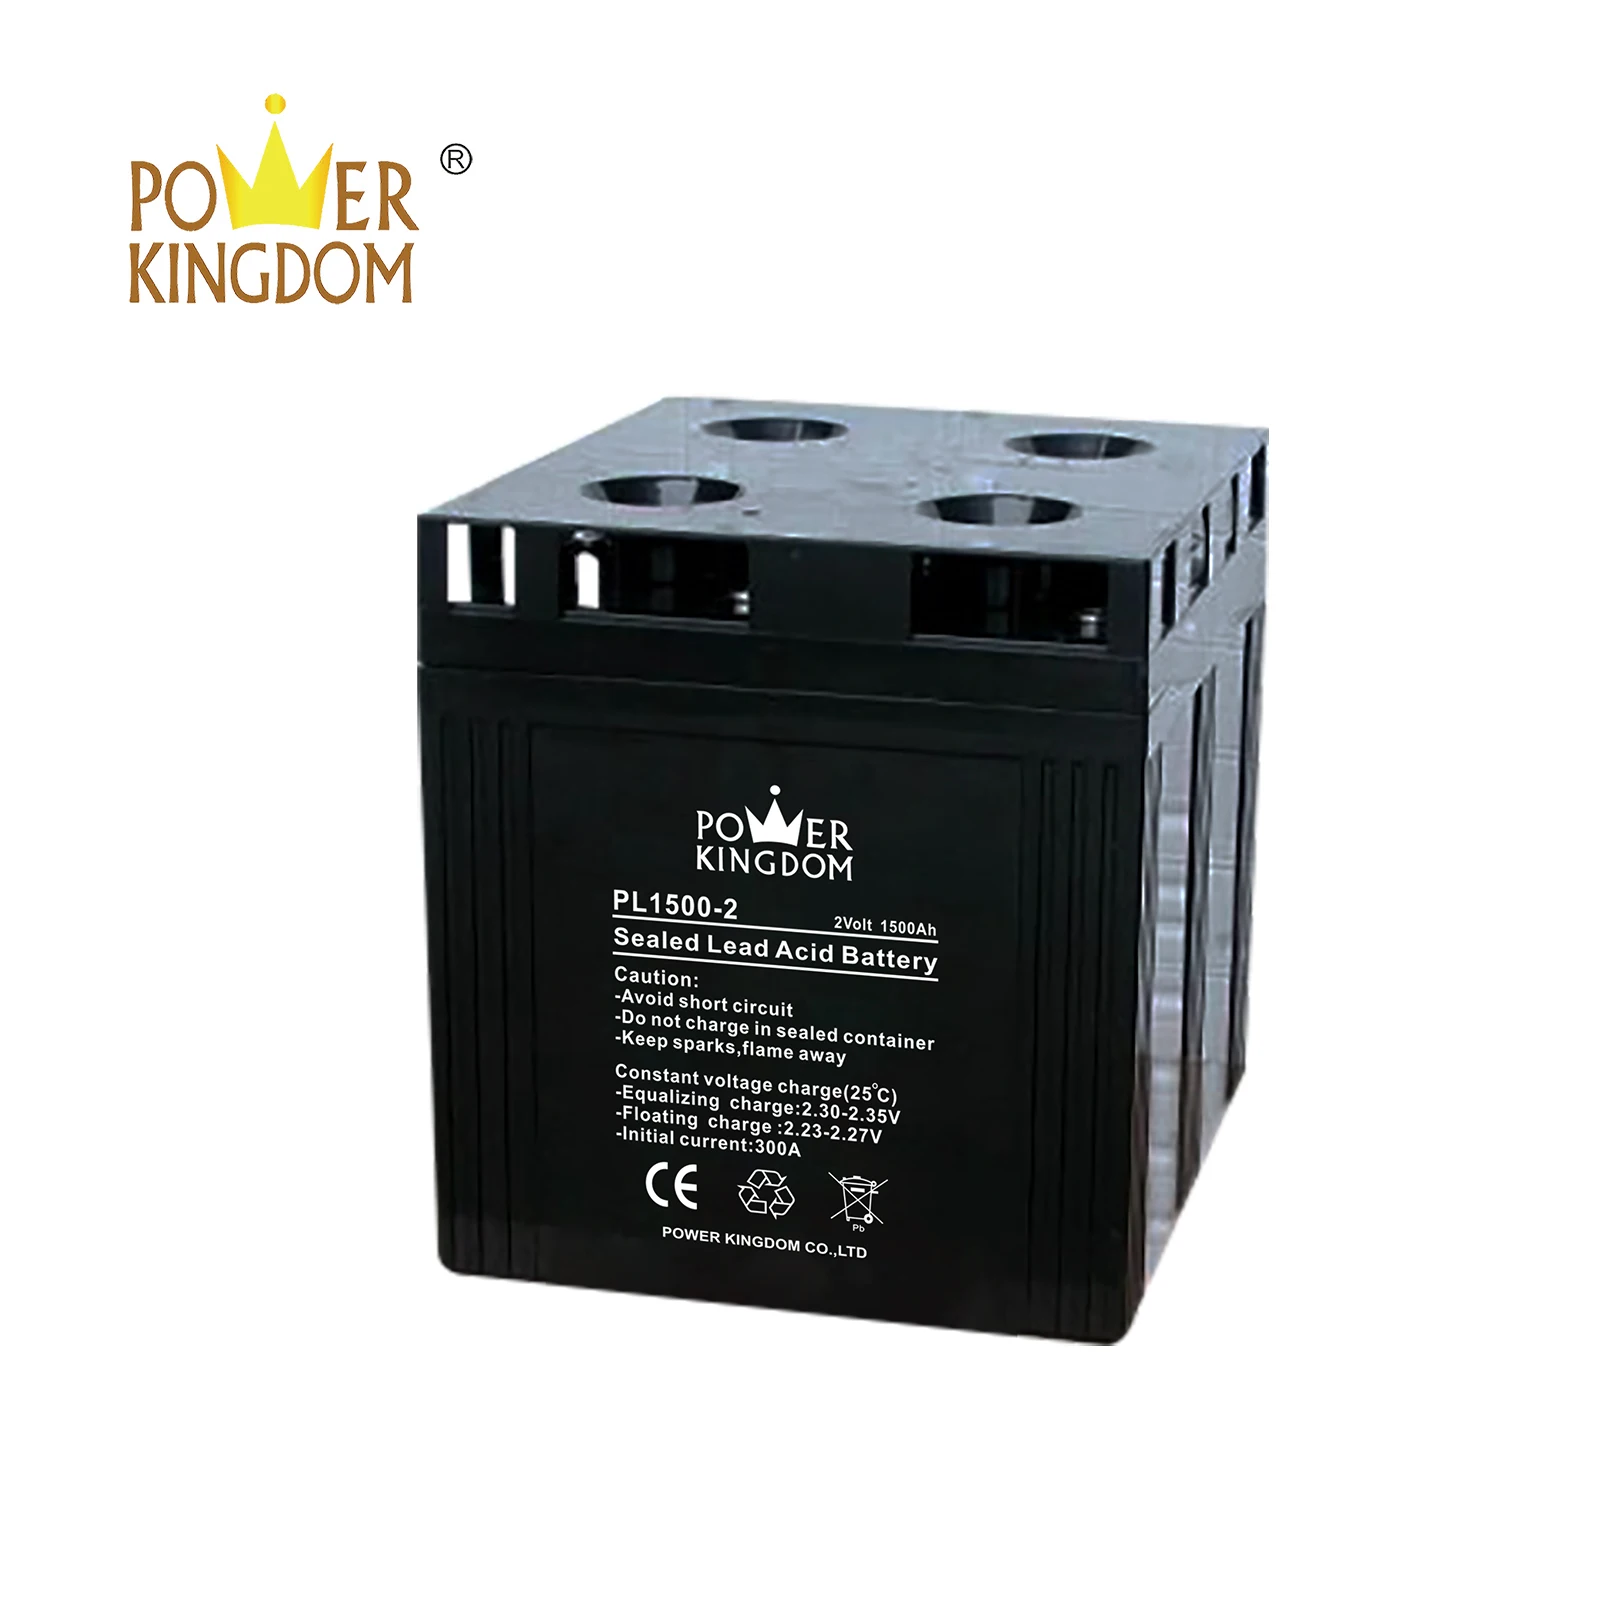 Power Kingdom good quality flooded cell battery Supply fire system